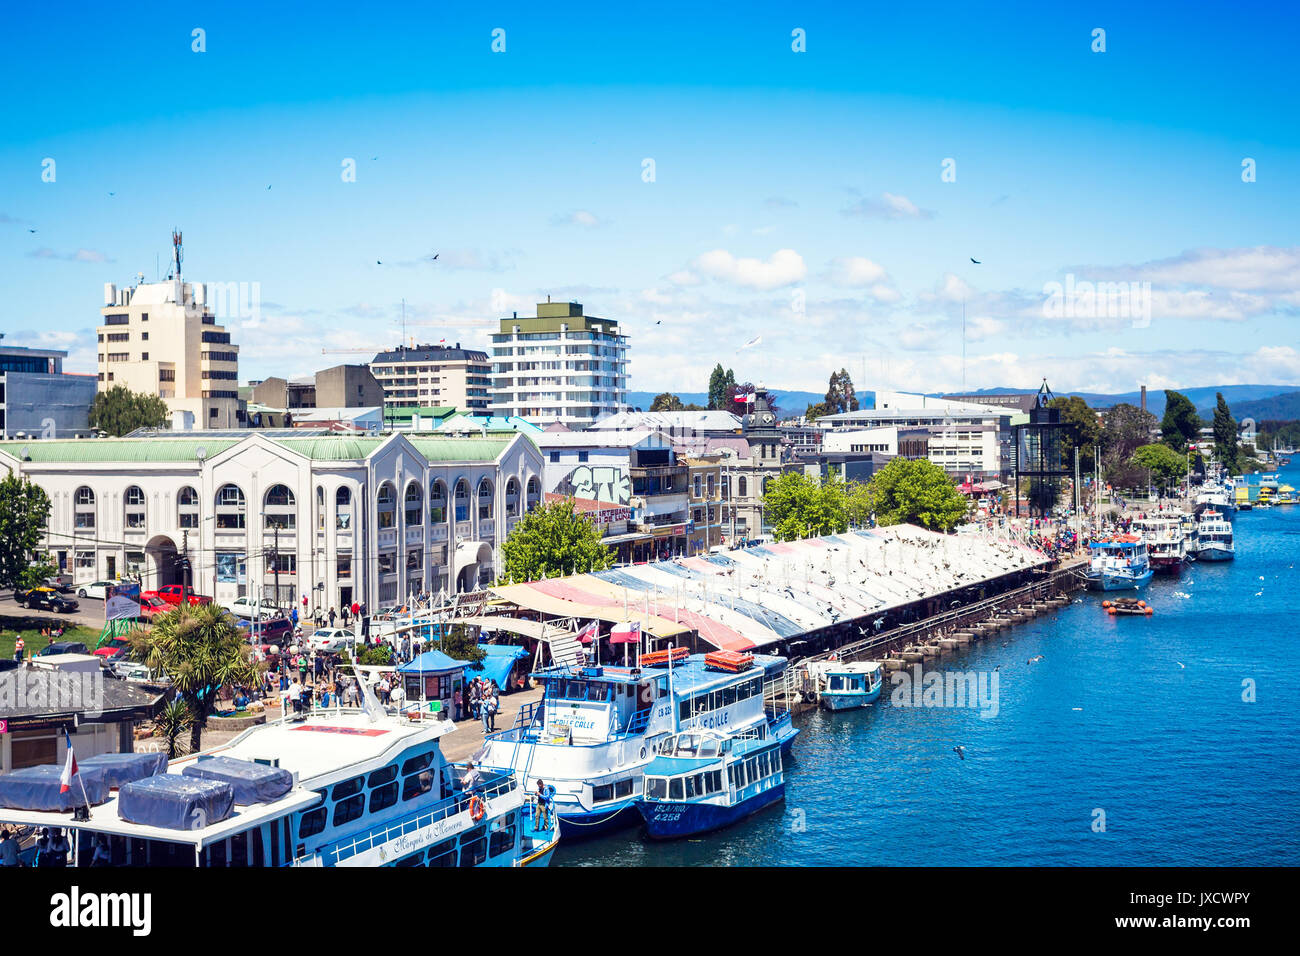 VALDIVIA, CHILE - OCTOBER 30, 2016: Pier and fish market at riverside of Calle-Calle river. This is the main view of Valdivia. Stock Photo